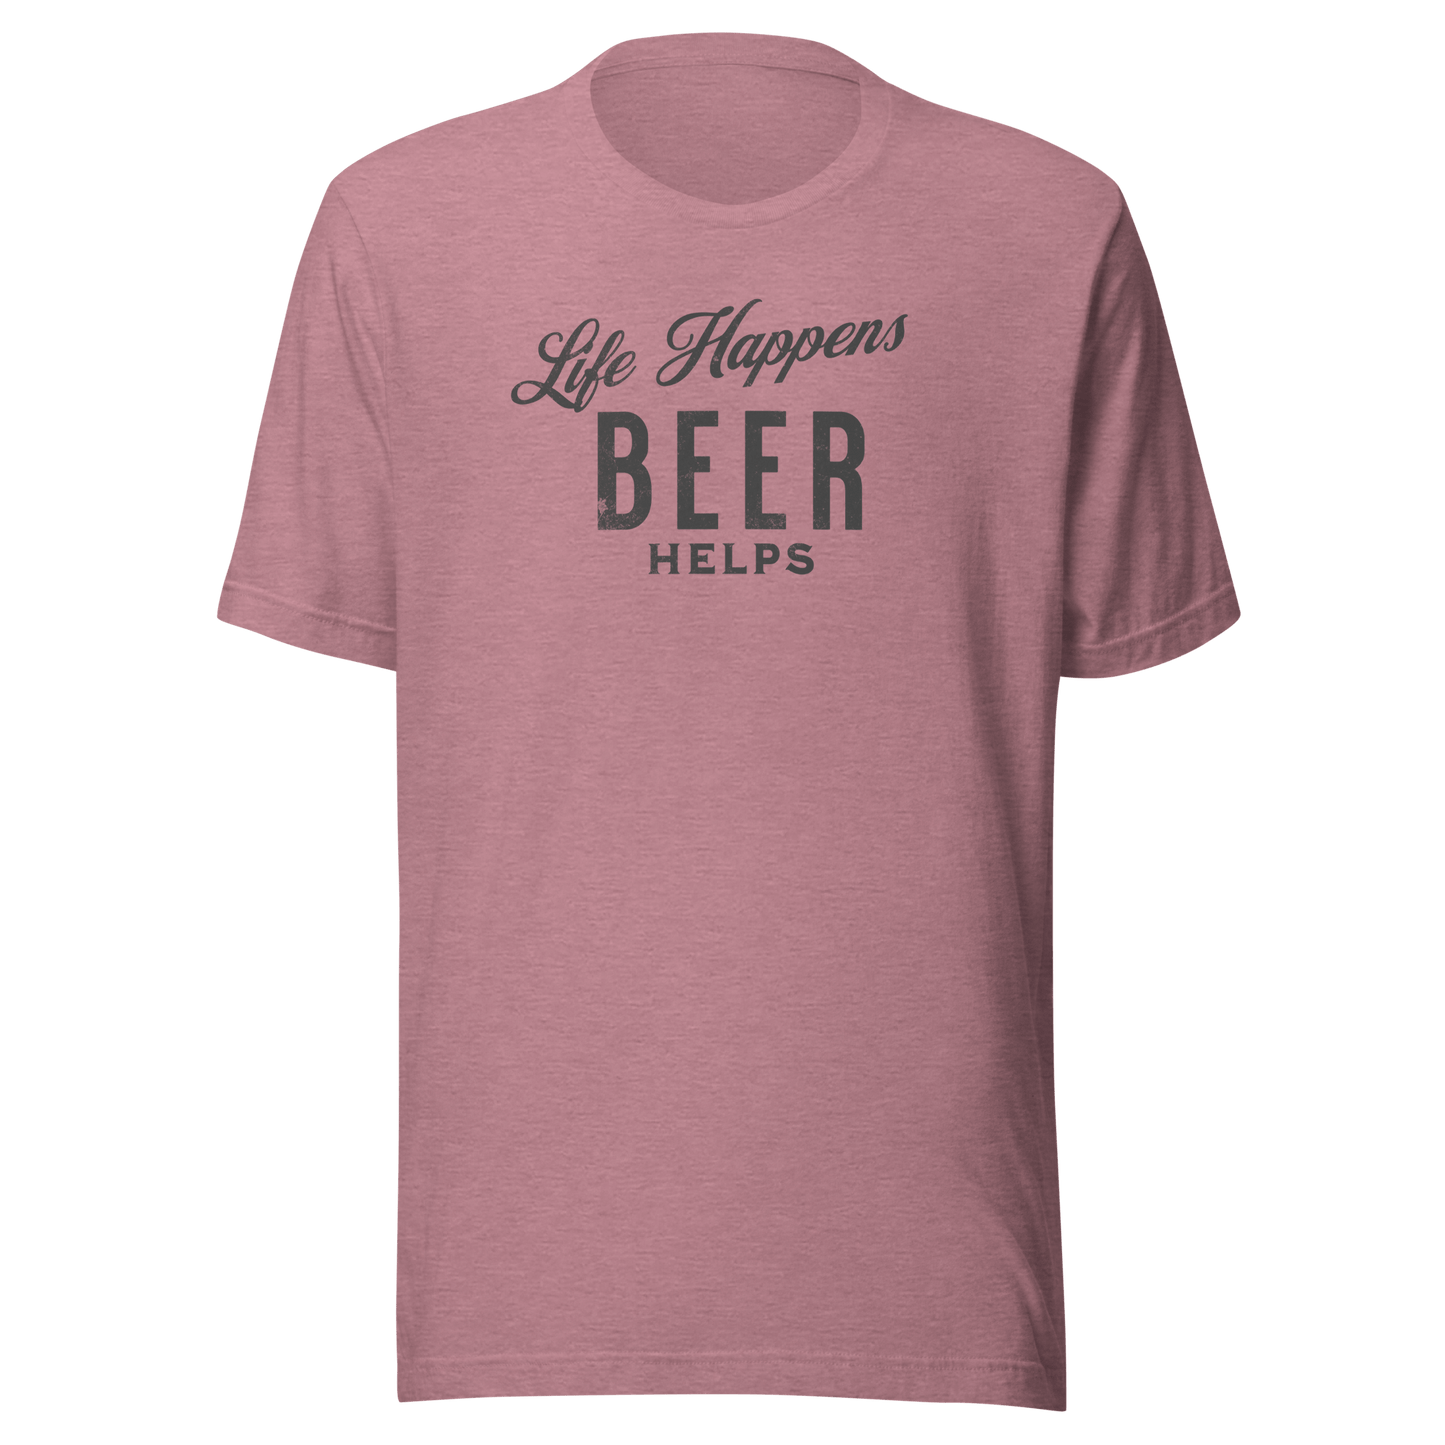 Life Happens Beer Helps Tee - Perfect Everyday Comfort BEER,DRINKING,MENS,New,TSHIRT,UNISEX,WOMENS Dayzzed Apparel